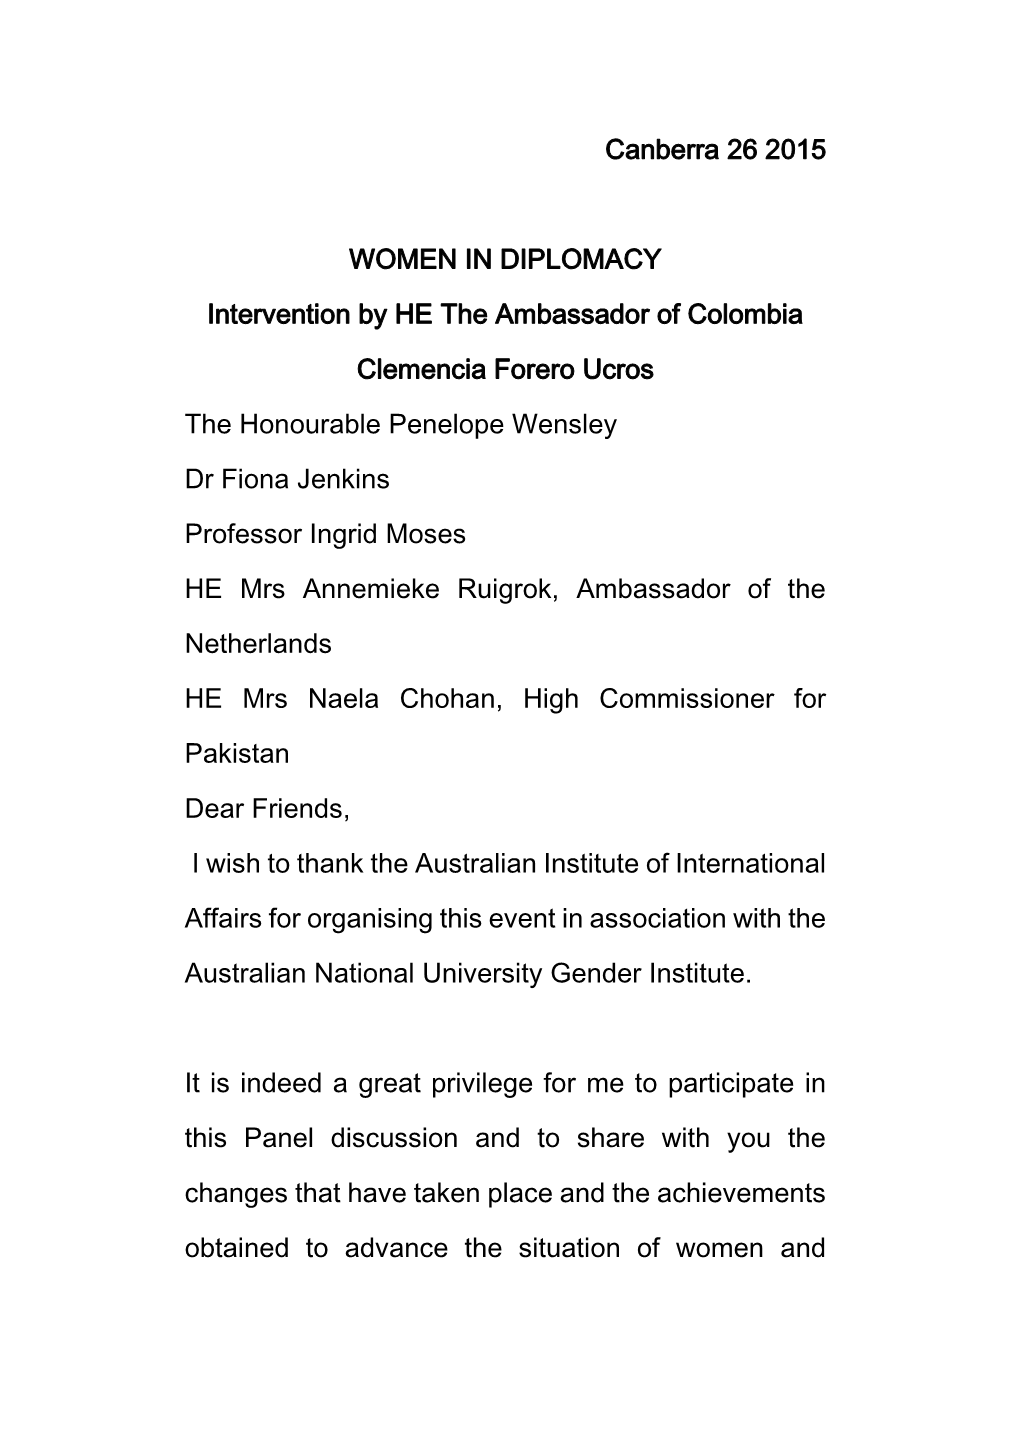 Canberra 26 2015 WOMEN in DIPLOMACY Intervention by HE